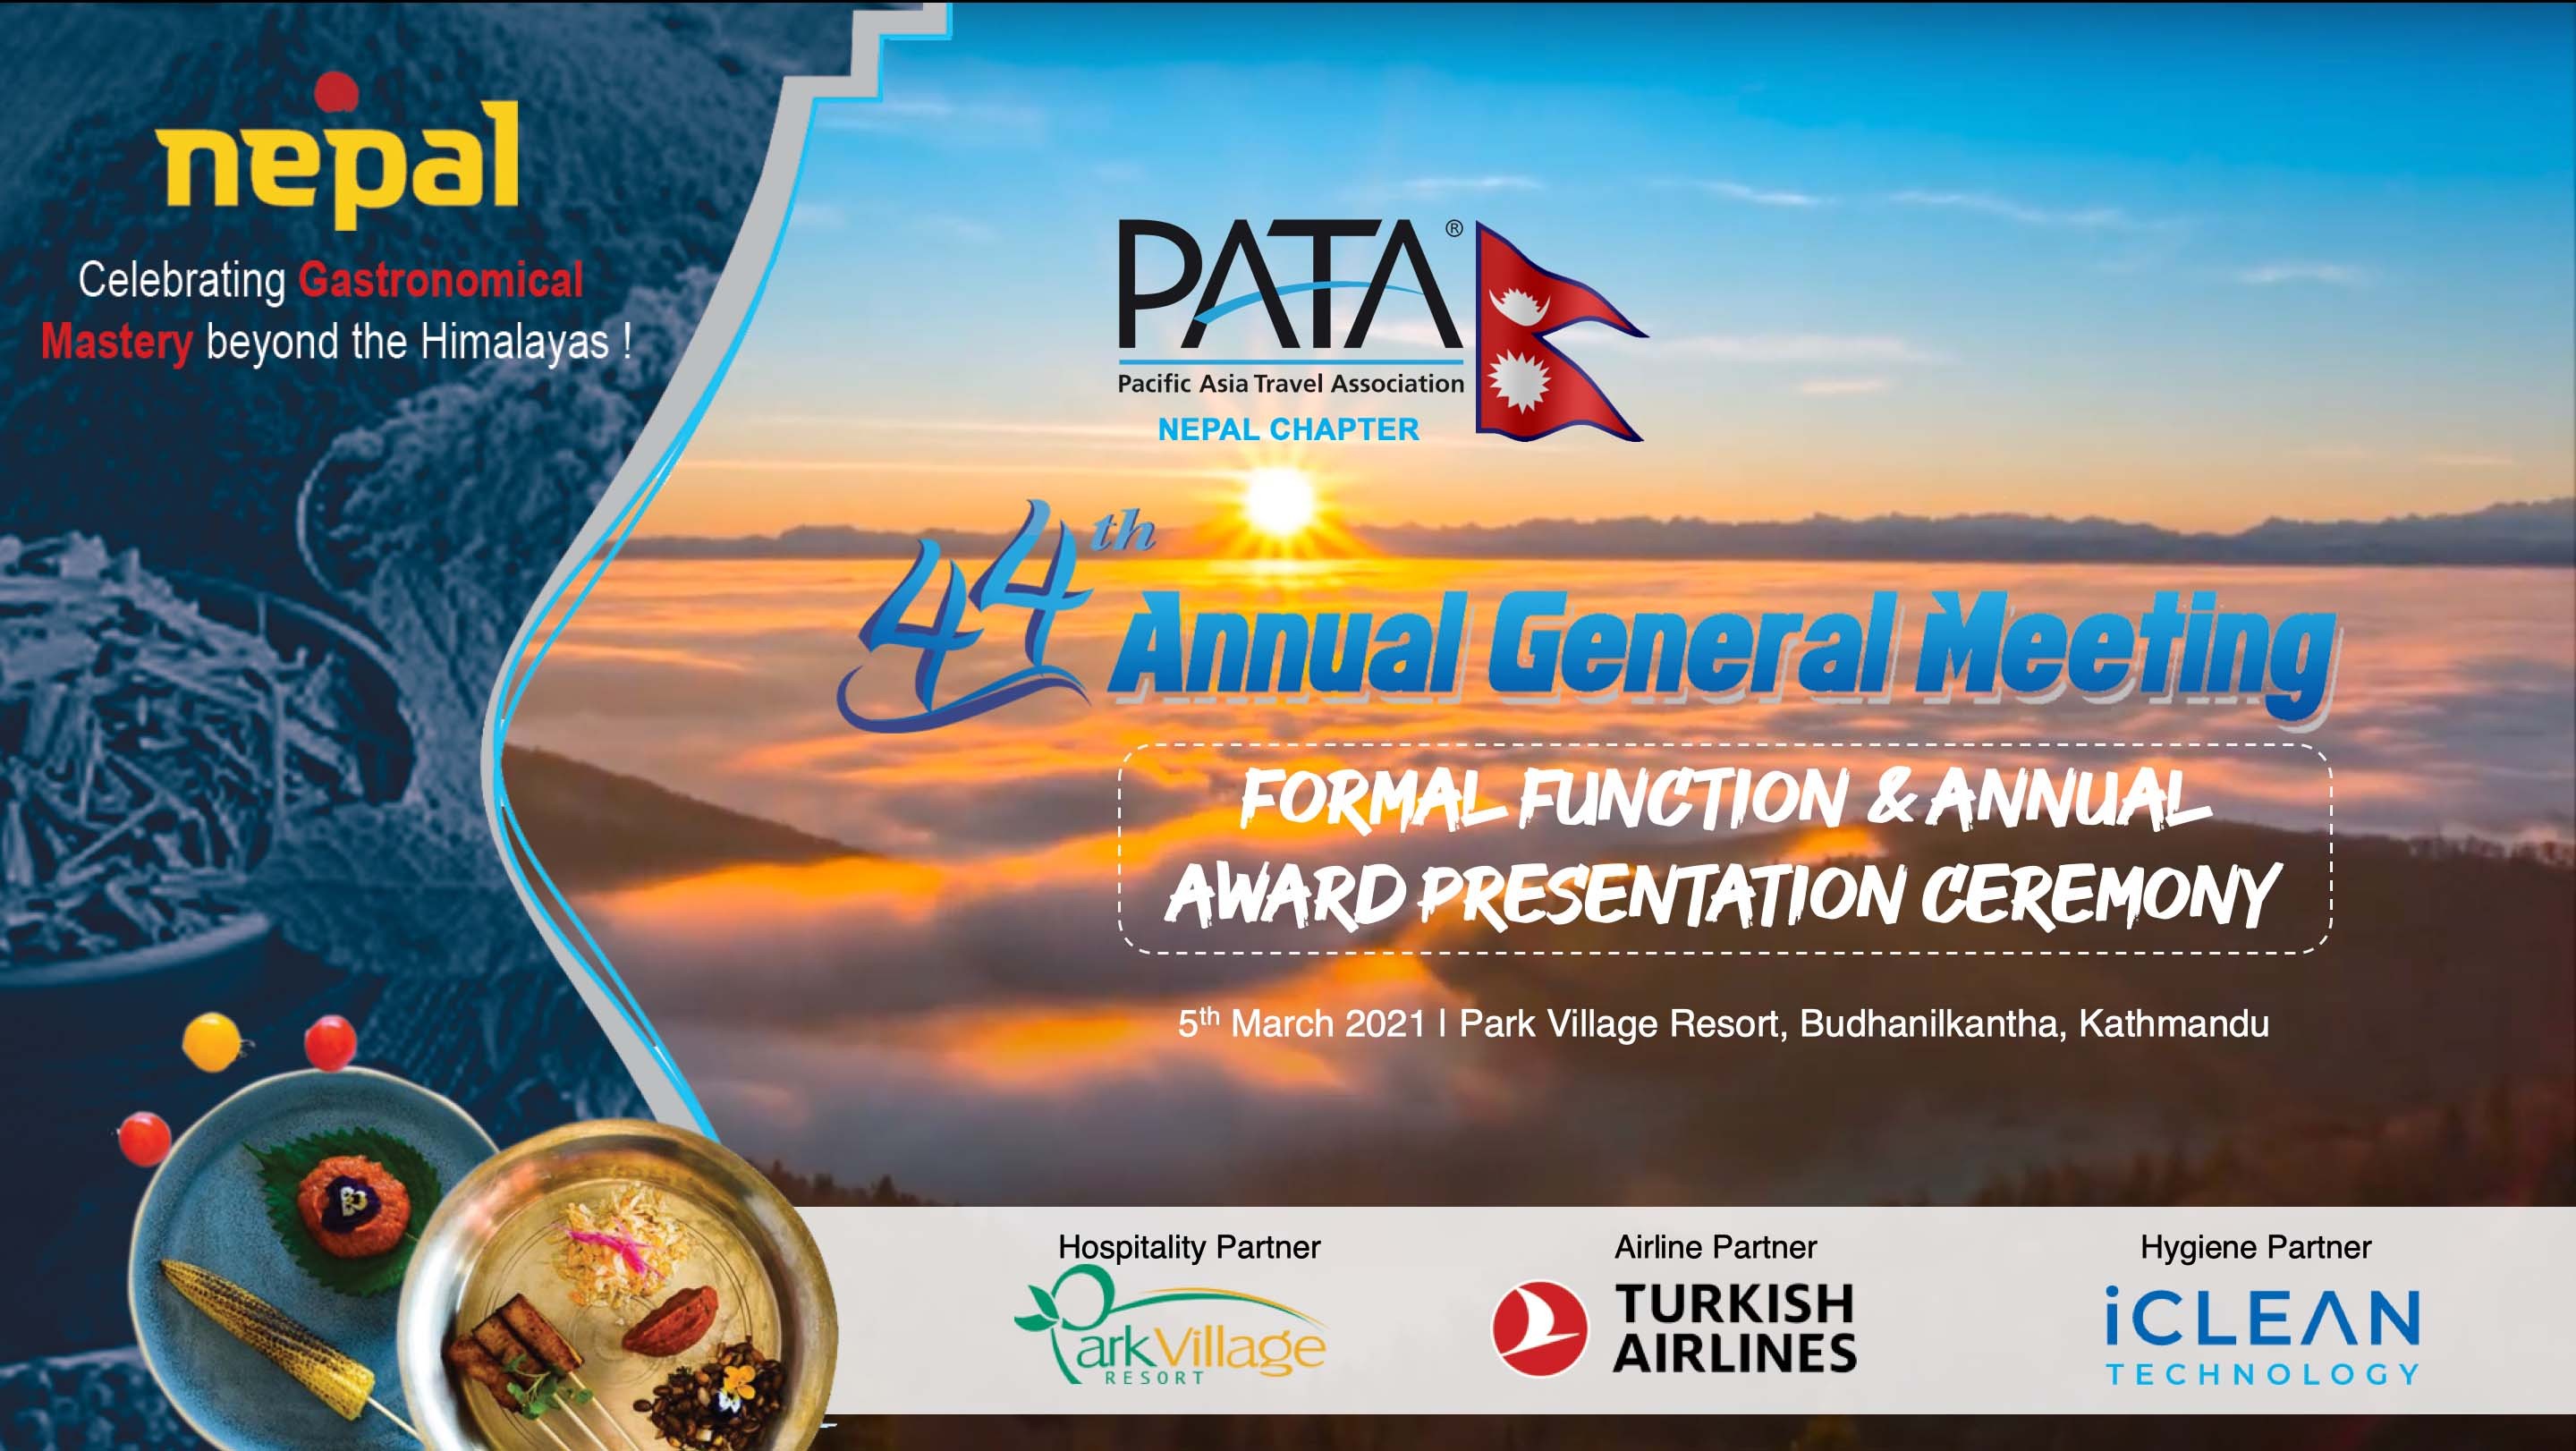 PATA Nepal Chapter Concludes 44th Annual General Meeting themed “Nepal: Celebrating Gastronomical Mastery Beyond Himalayas!”